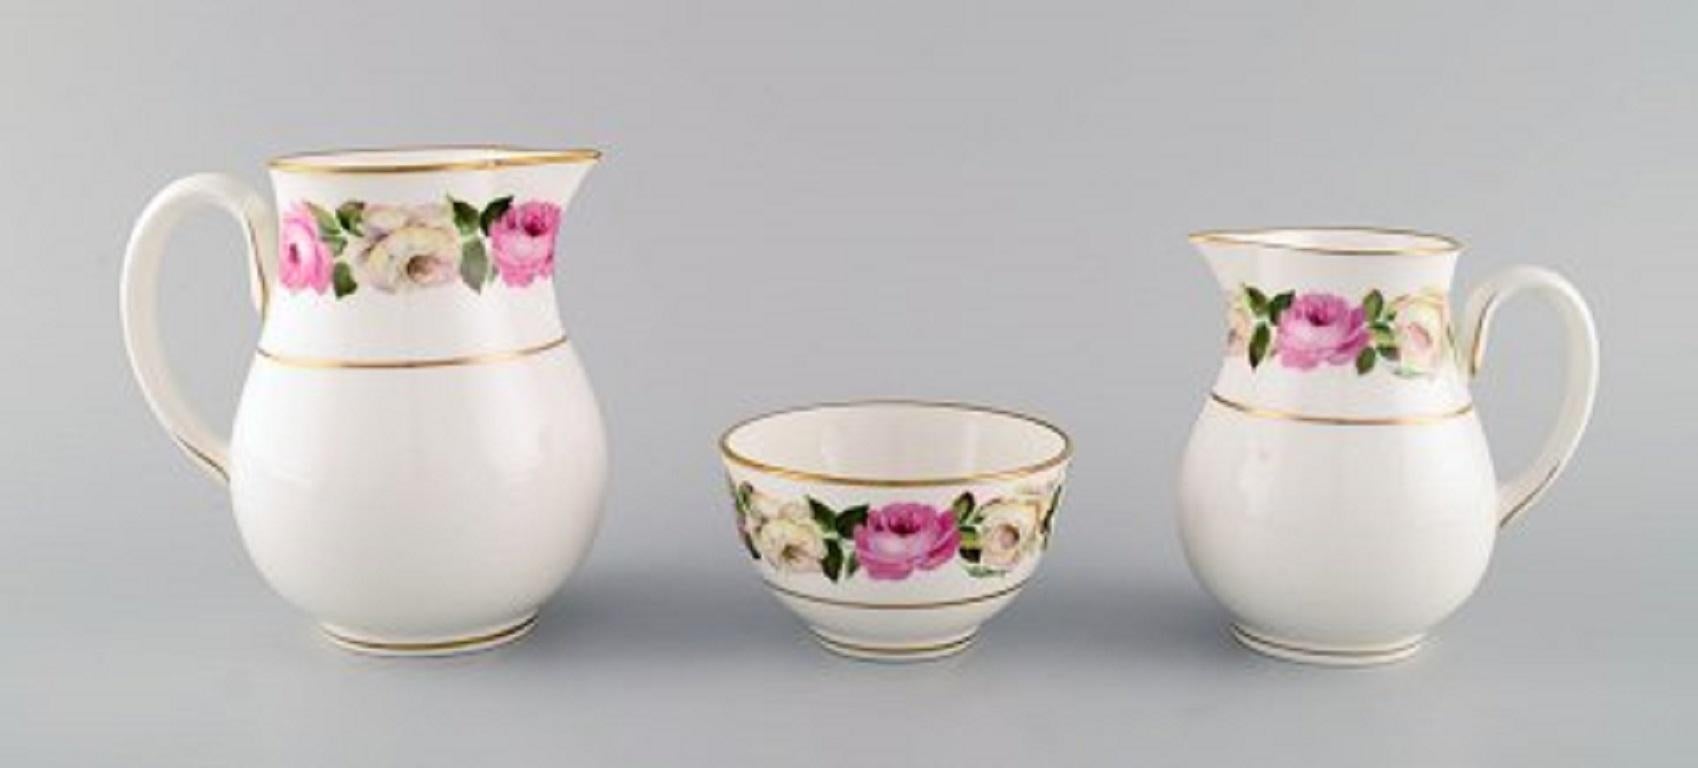 Royal Worcester, England. Complete tea service for seven people in porcelain with floral motifs. Dated 1983.
Consisting of seven teacups with saucers, teapot, cream and milk jug, sugar bowl and seven + seven plates.
The teacup measures: 9 x 7.5